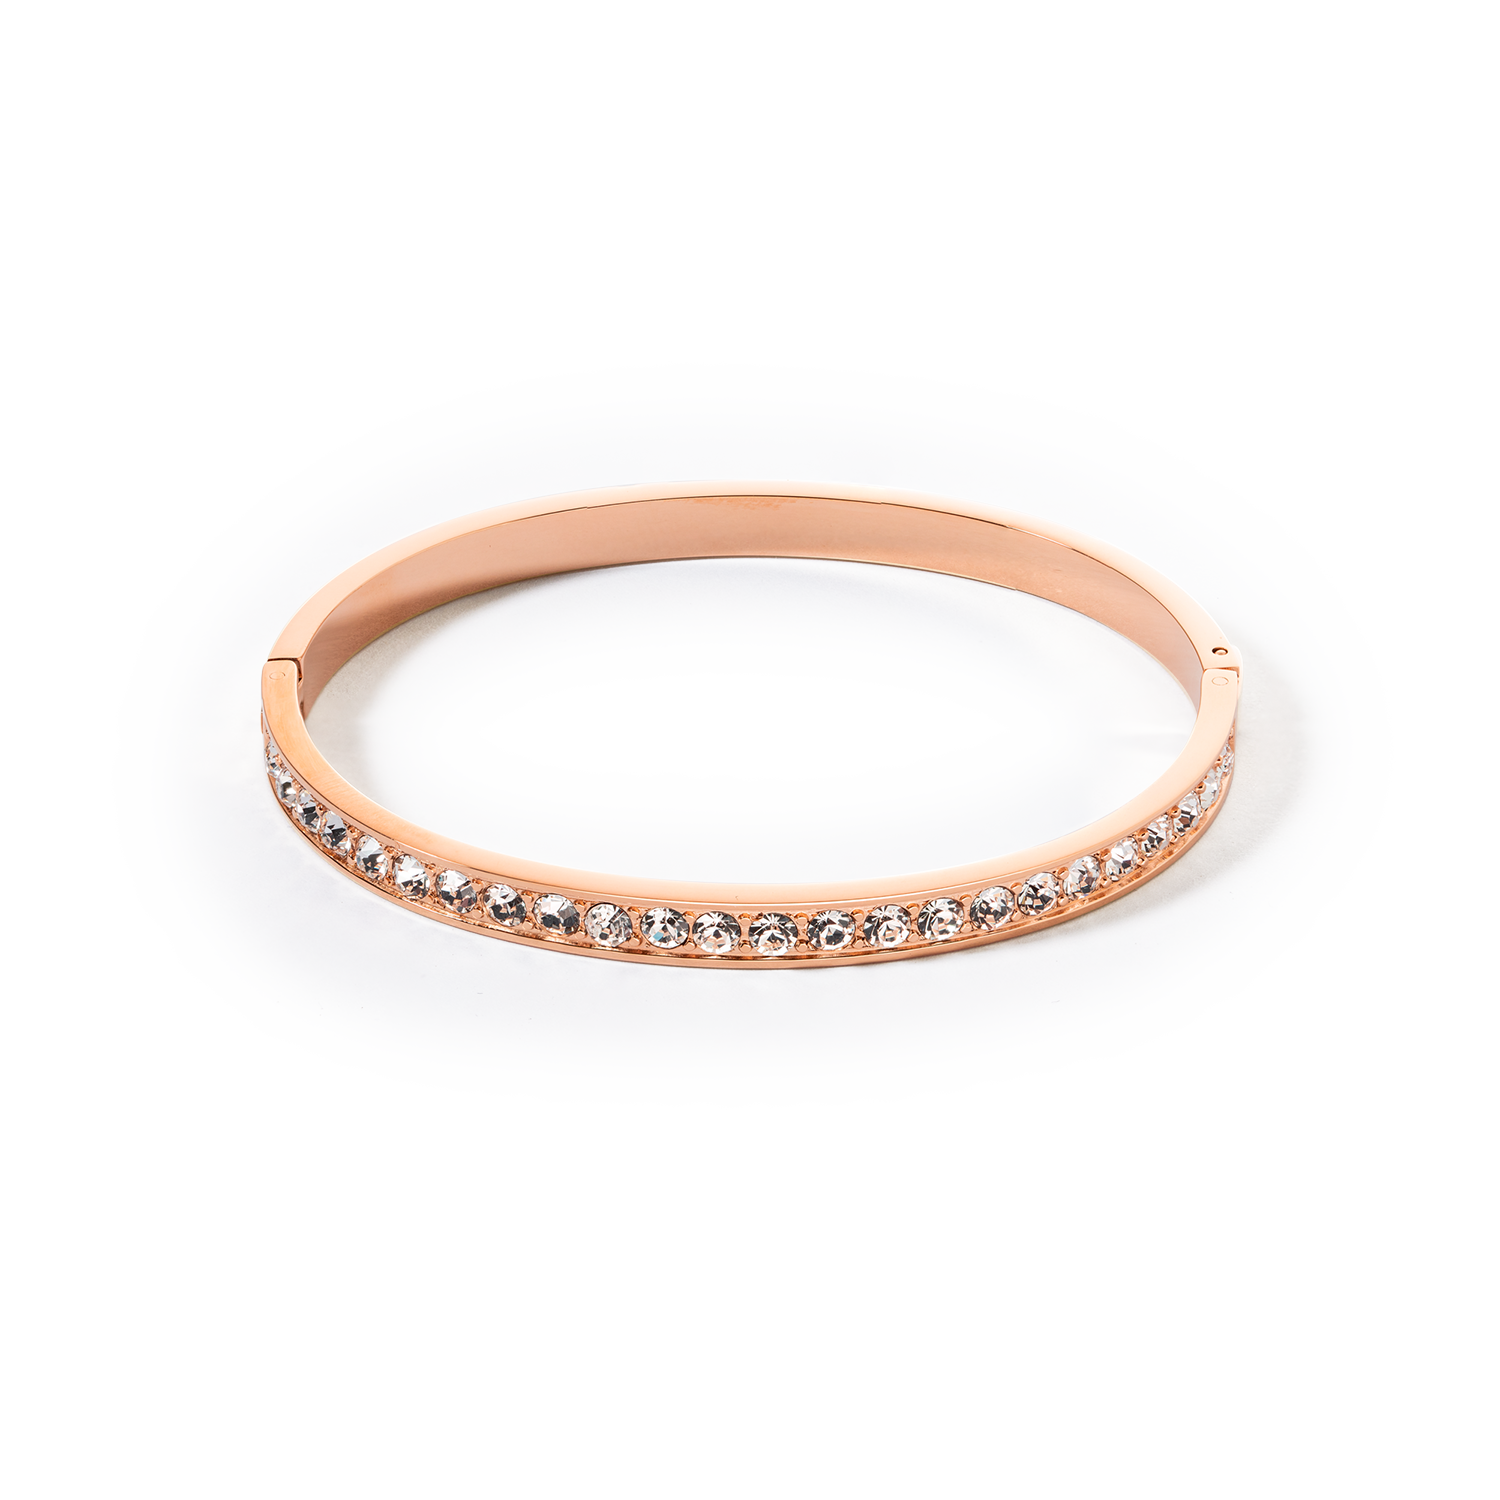 Bangle stainless steel & crystals rose gold crystal 19